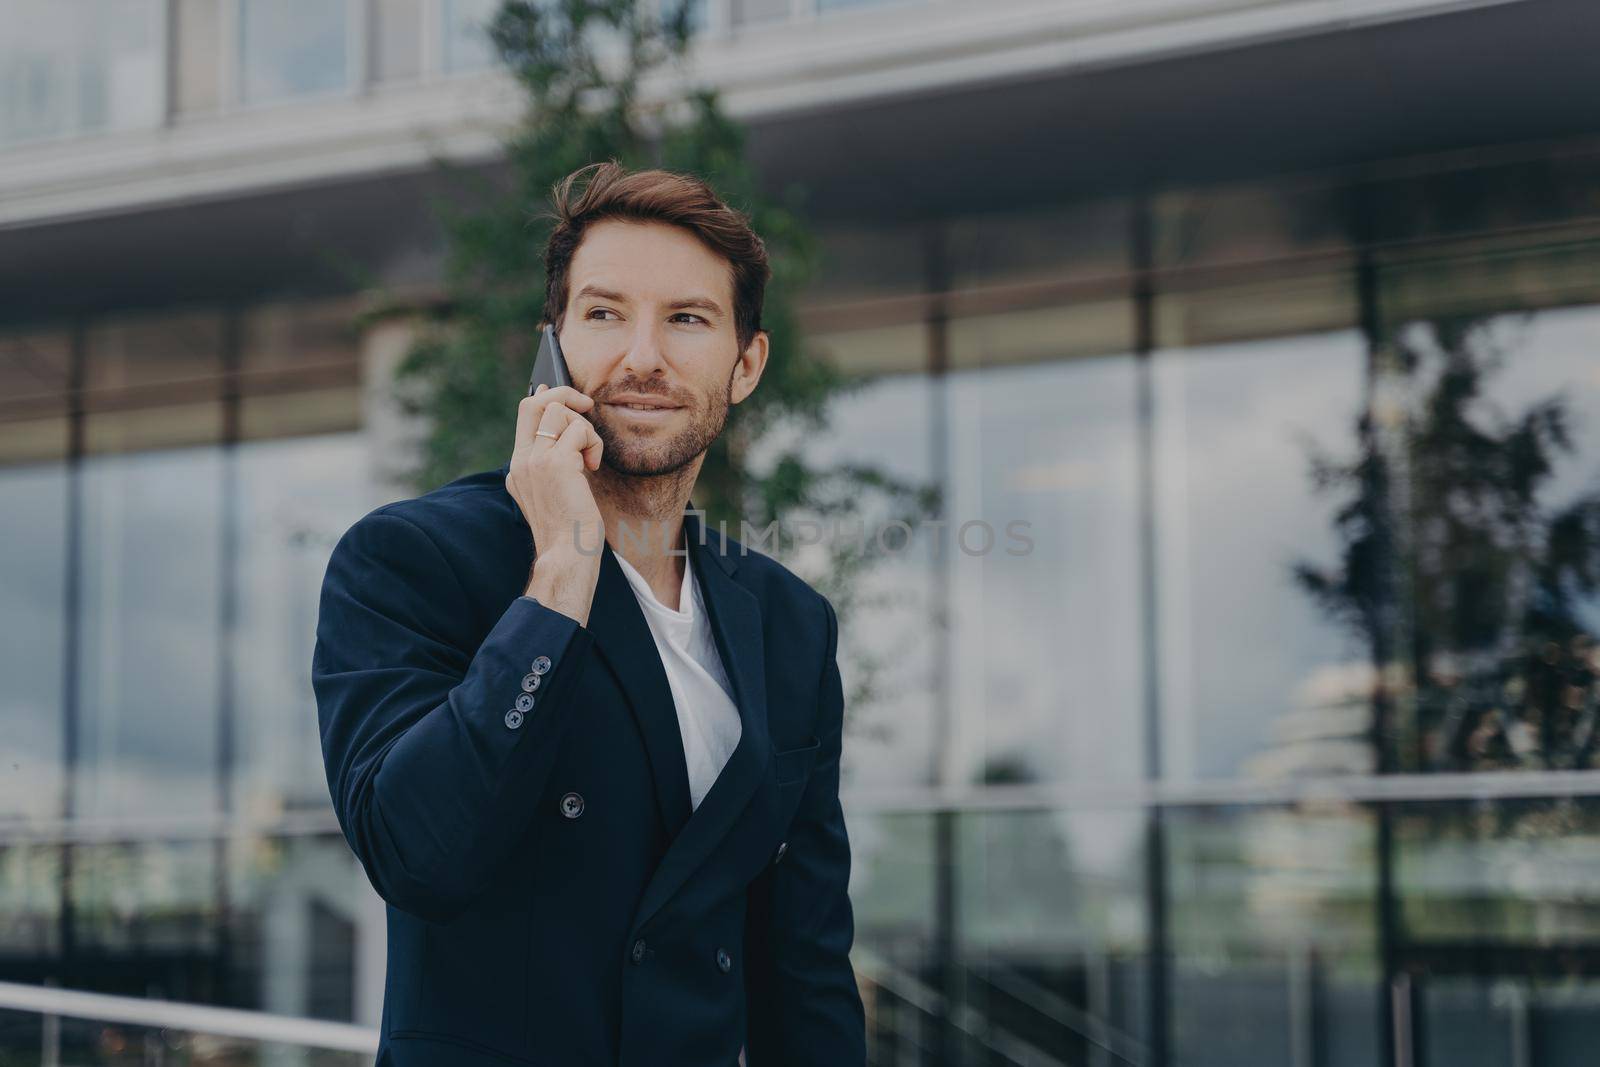 Male entrepreneur talks via phone solves urgent problems poses near business center dressed in black suit uses modern technologies for communication looks away thoughtfully. Technology work lifestyle